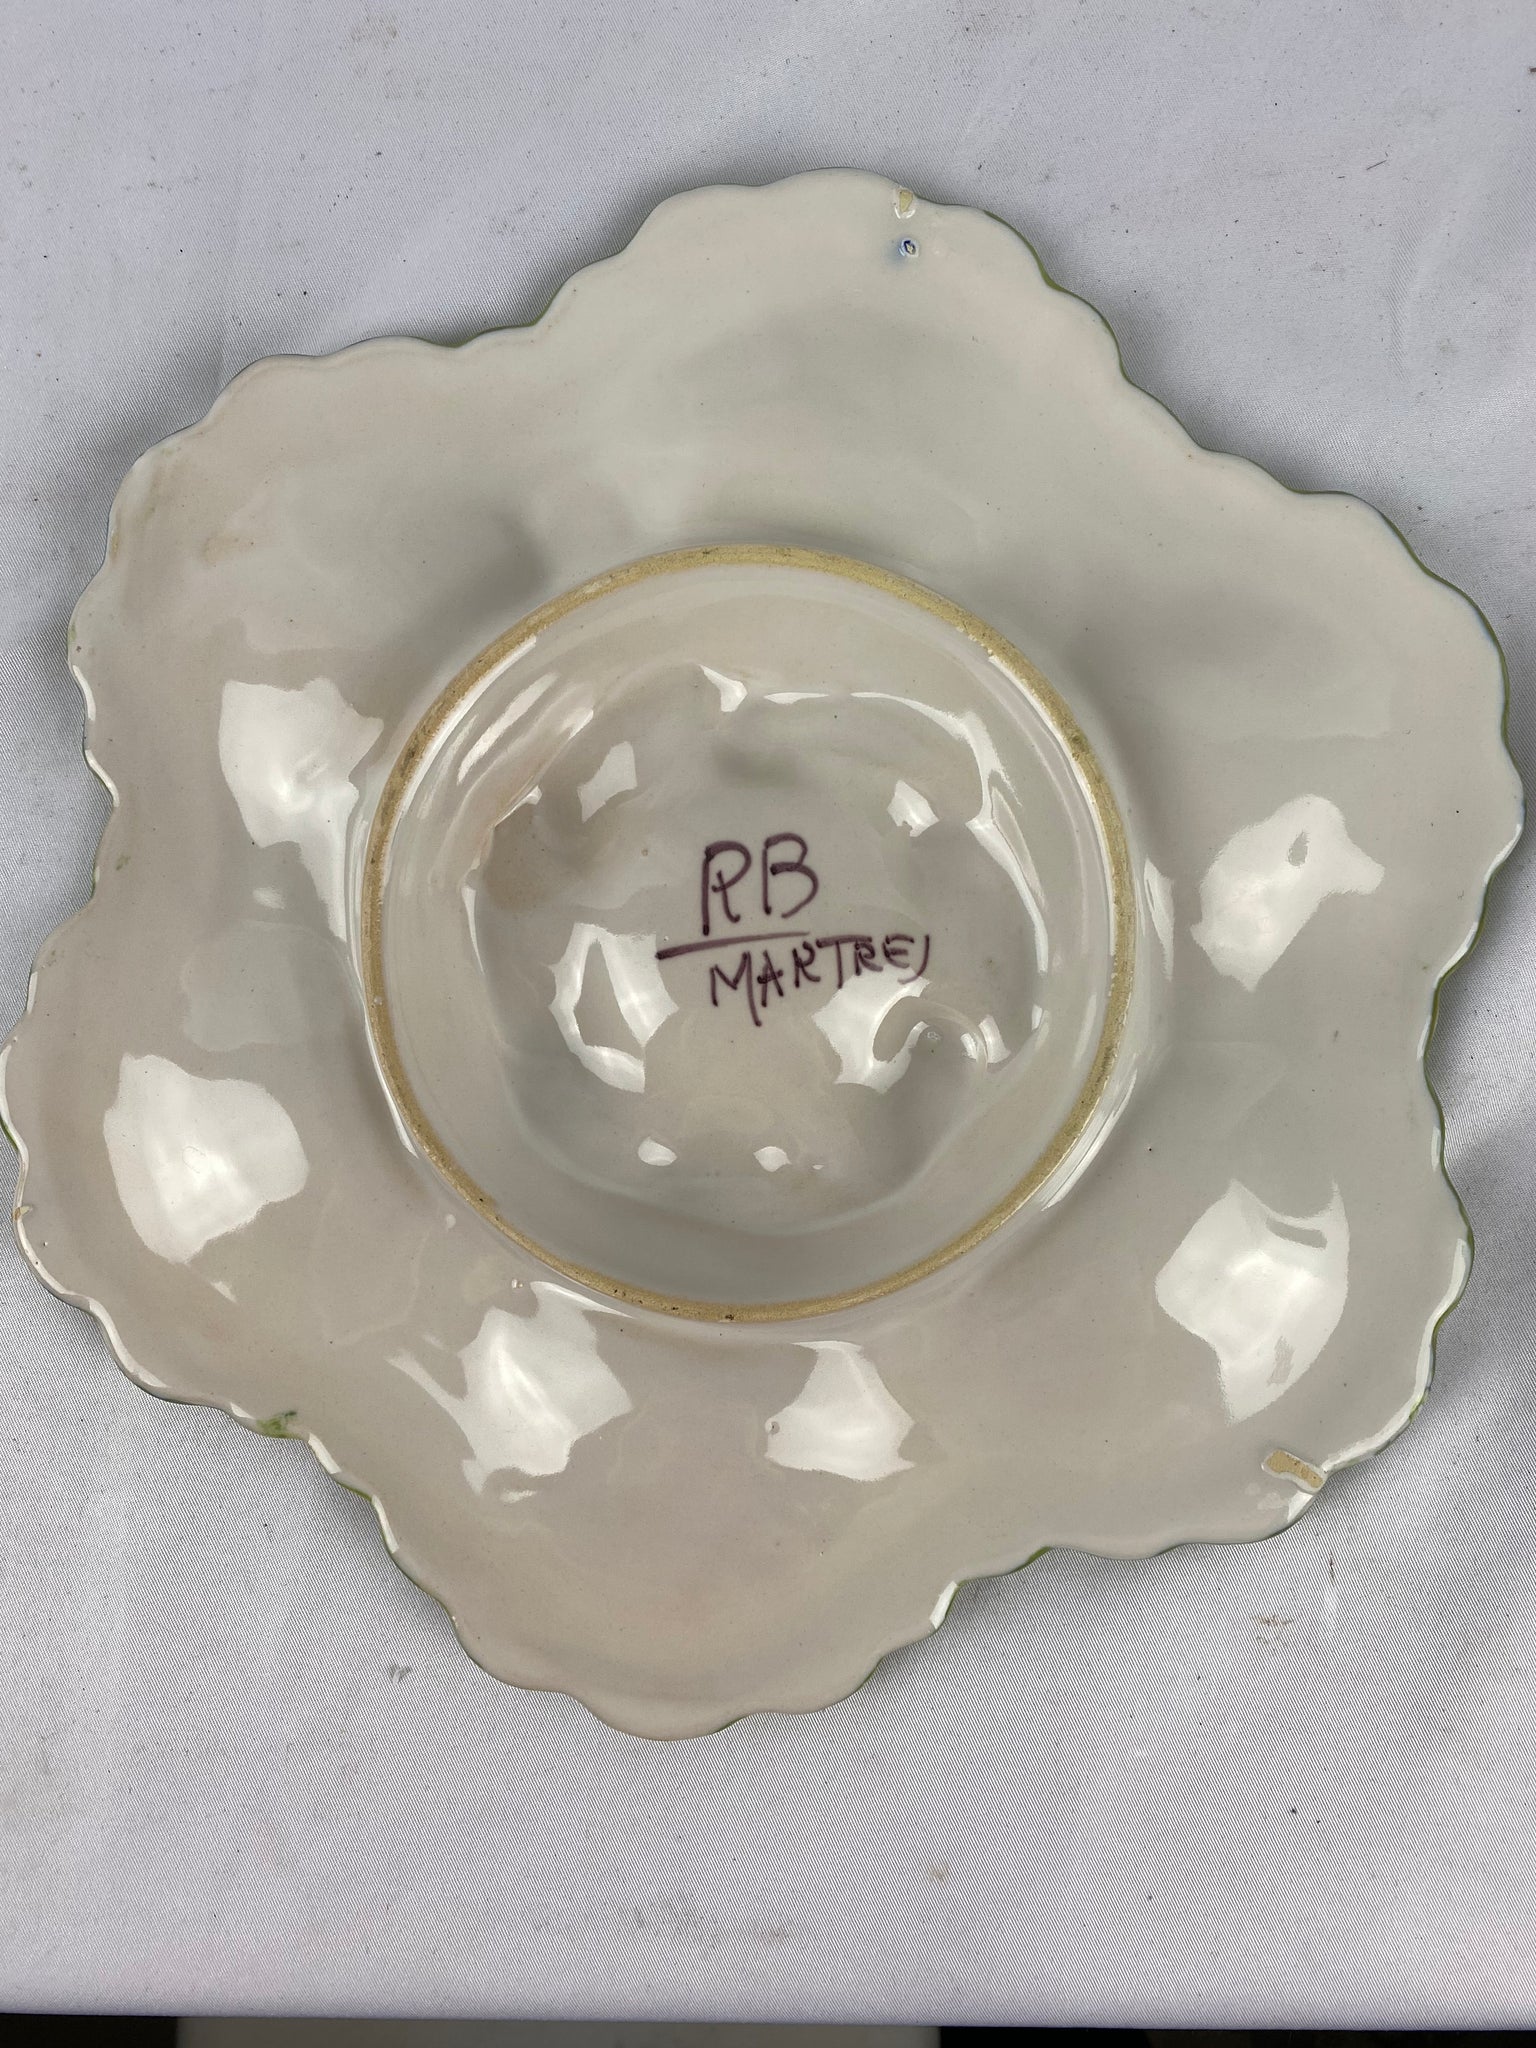 French Faience Oyster Plate (have 6)